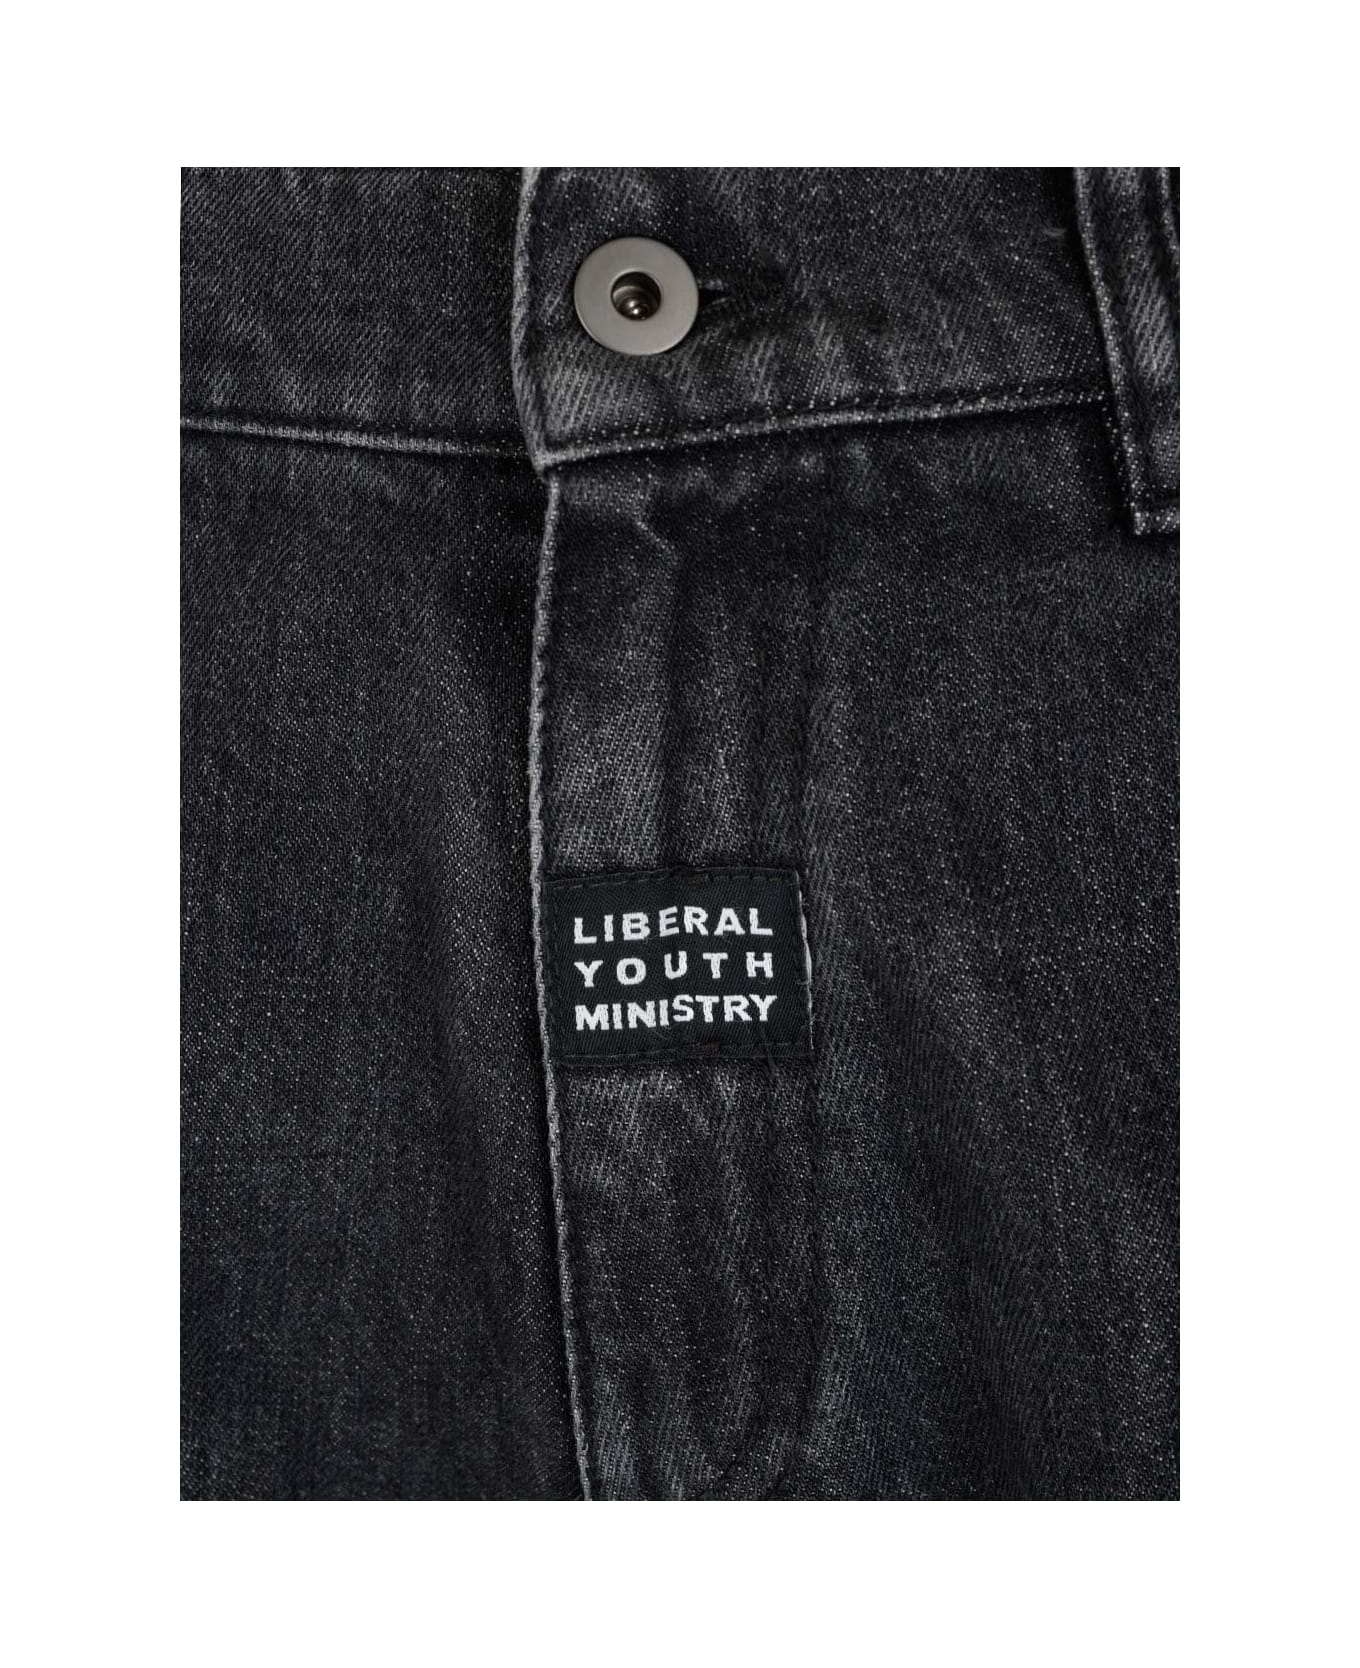 Liberal Youth Ministry Black Jeans - Black